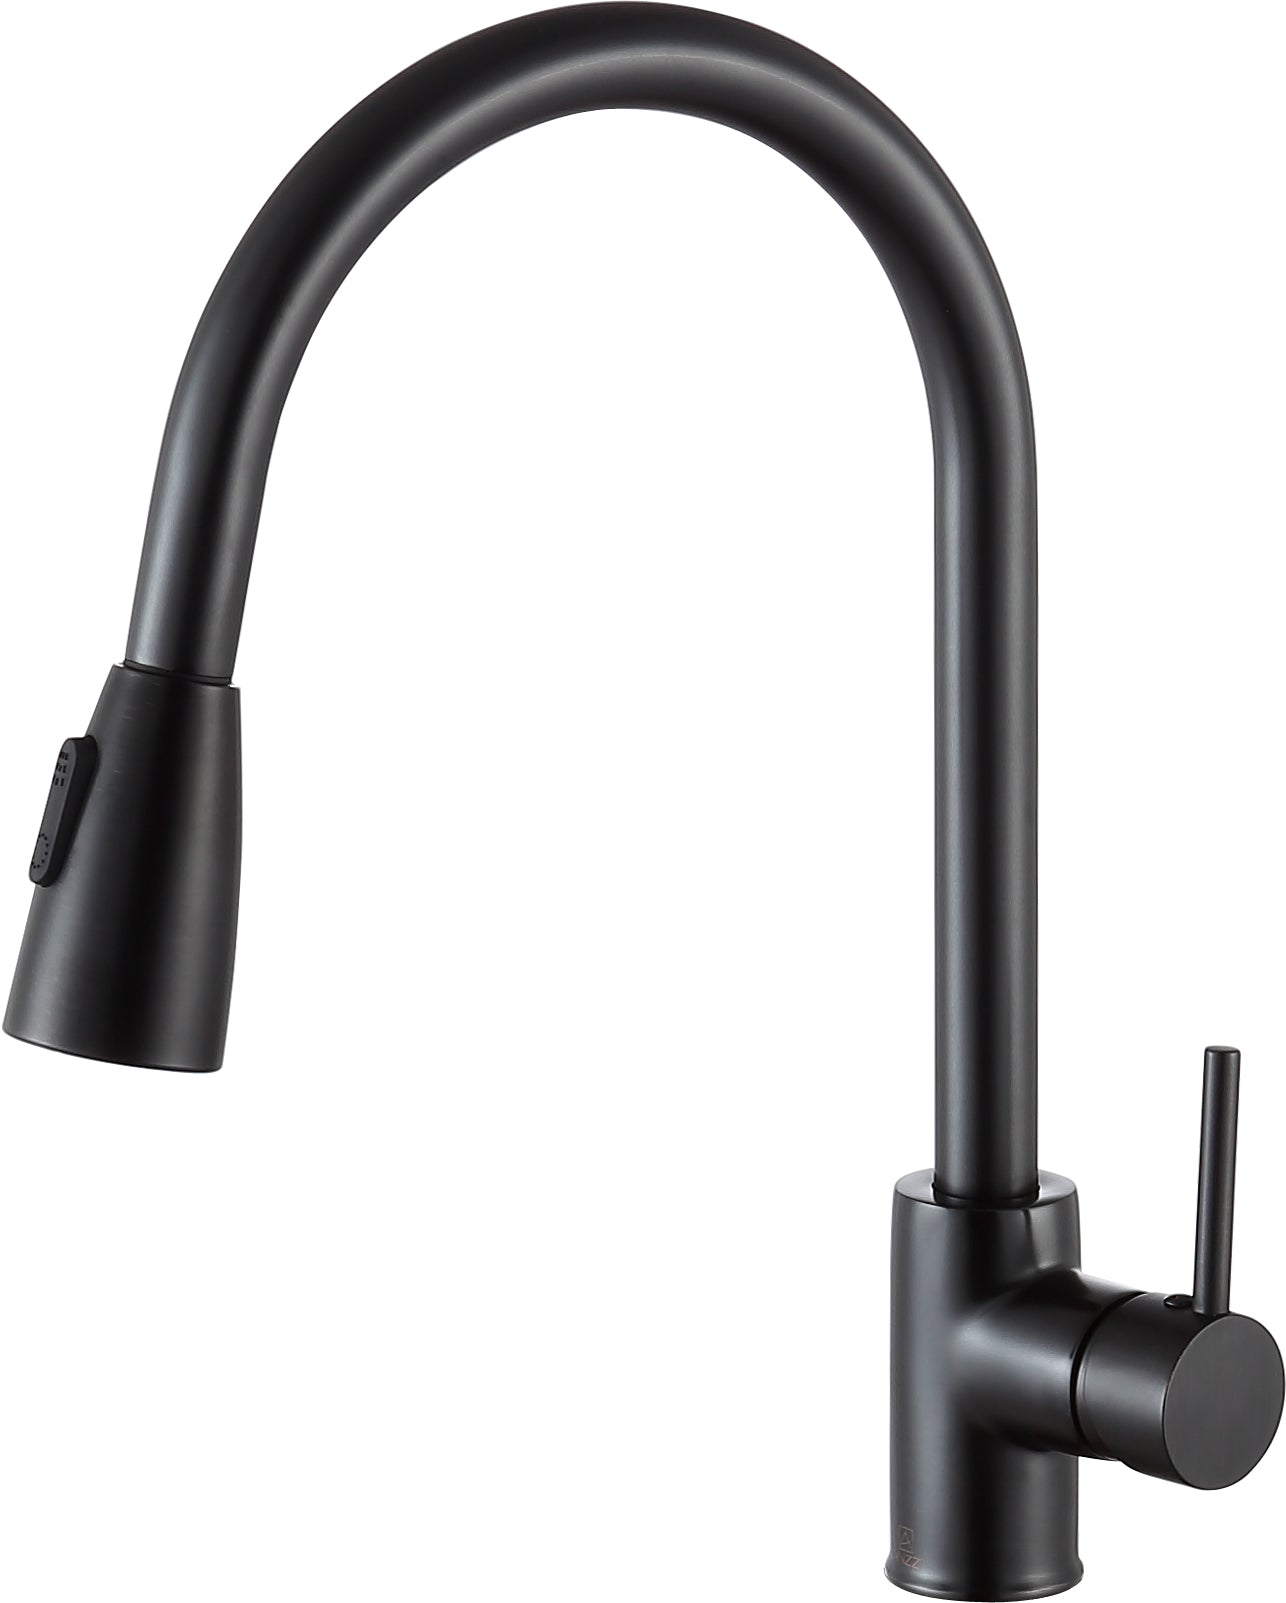 KF-AZ212ORB - Sire Single-Handle Pull-Out Sprayer Kitchen Faucet in Oil Rubbed Bronze